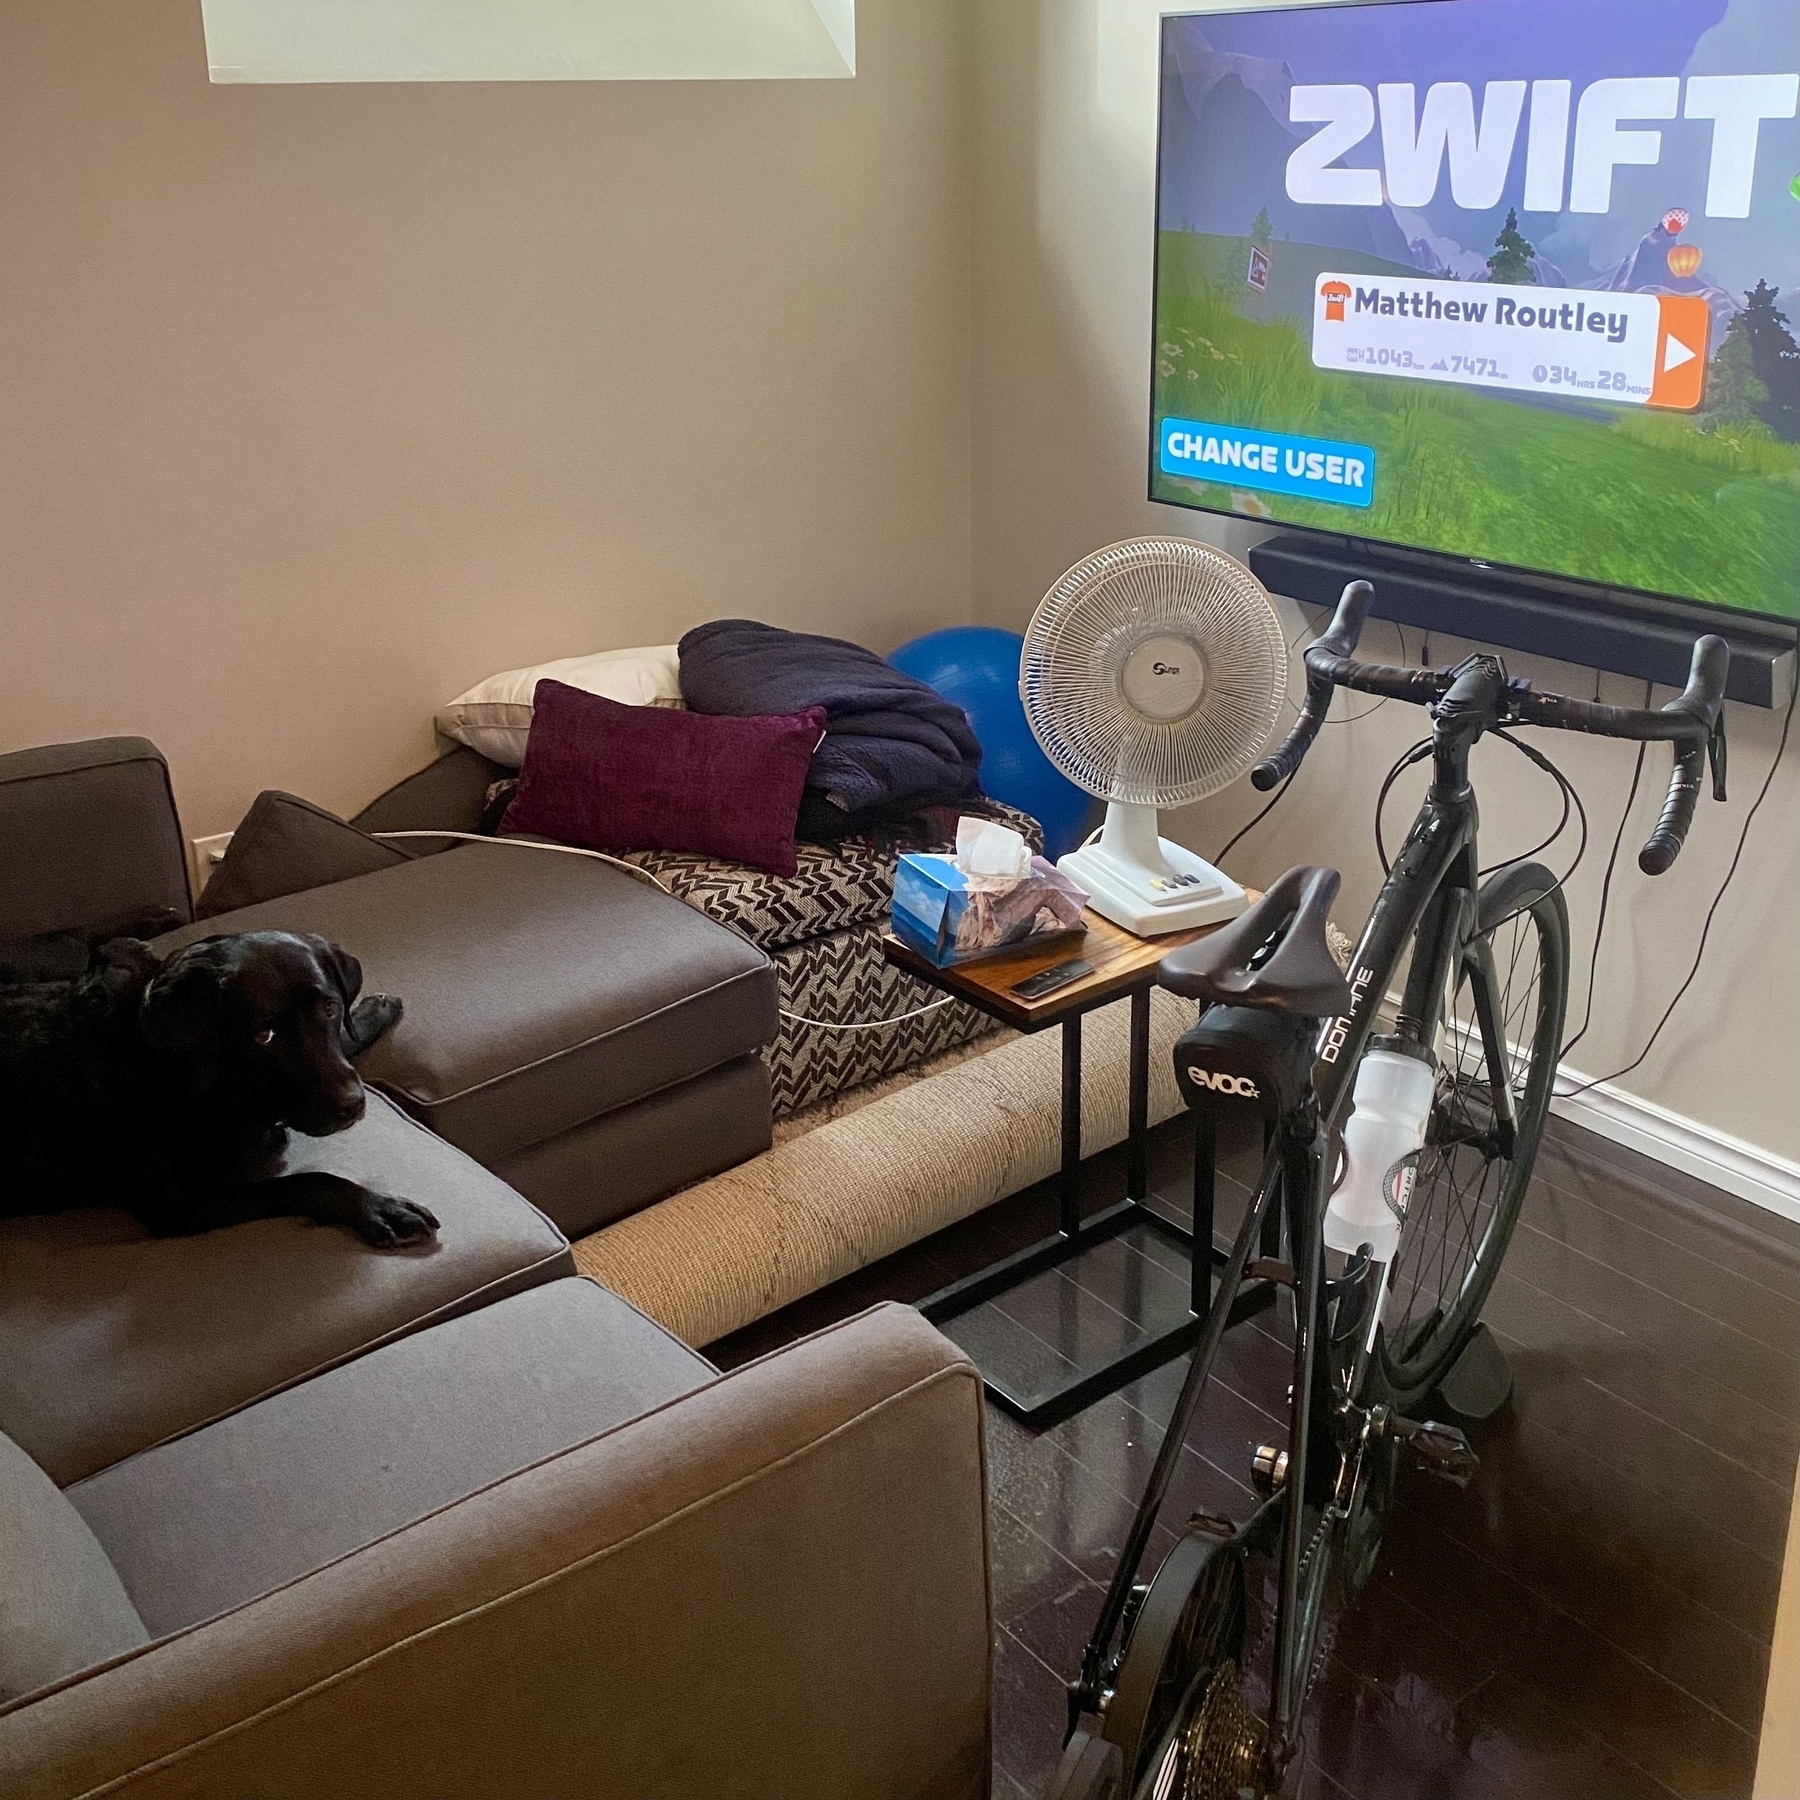 Indoor bike in front of a TV with Zwift. Black lab watching from the couch